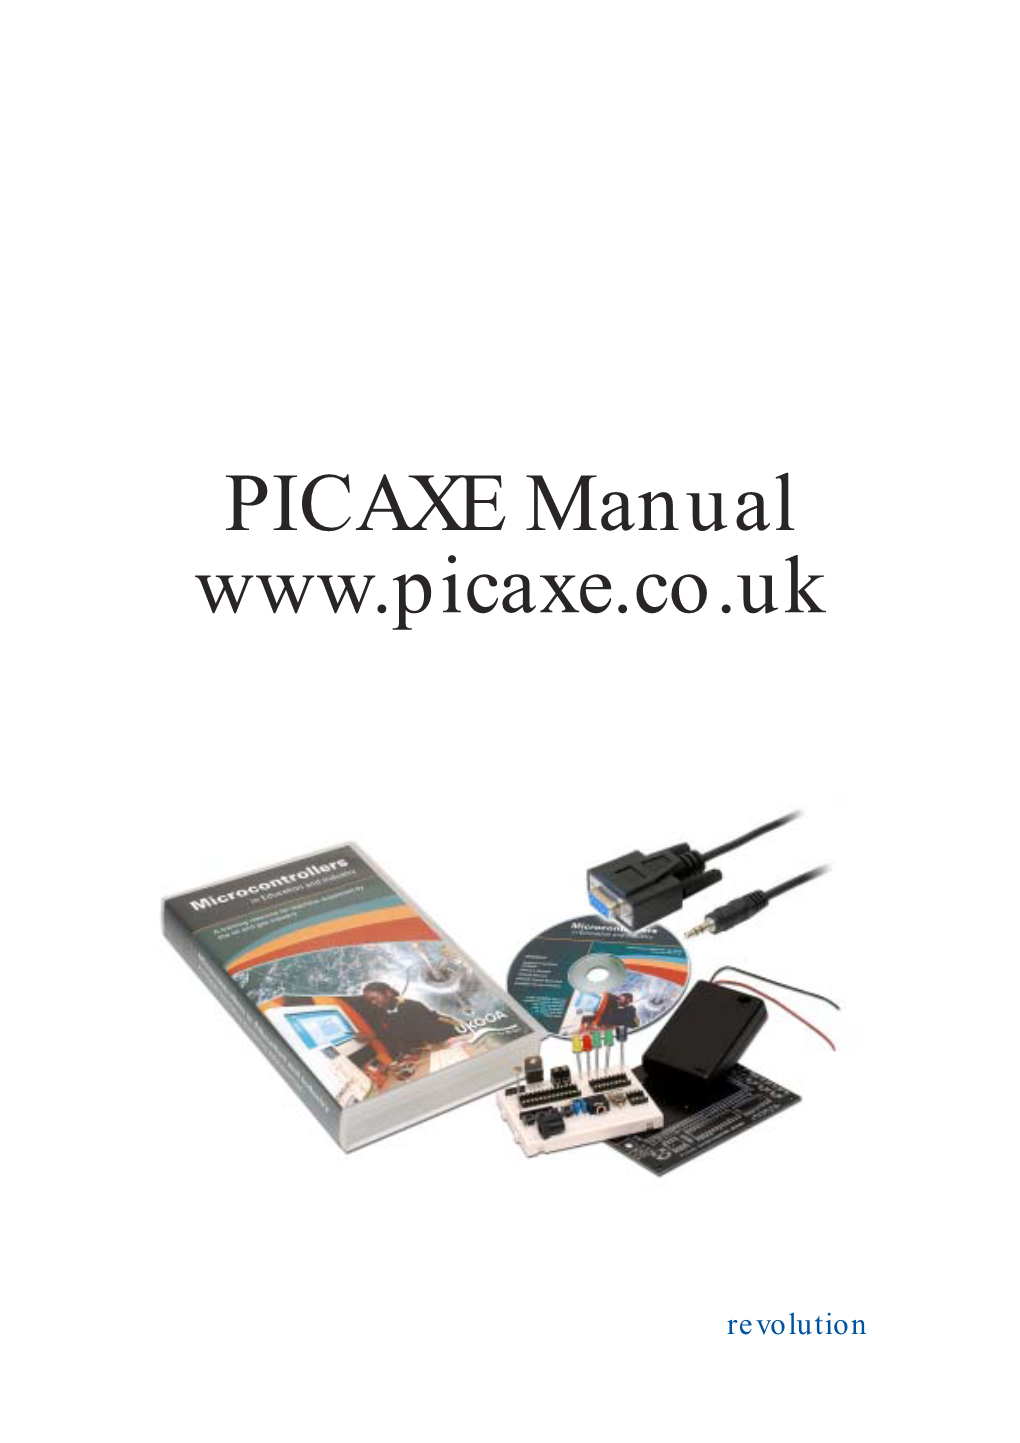 PICAXE Manual Section 1